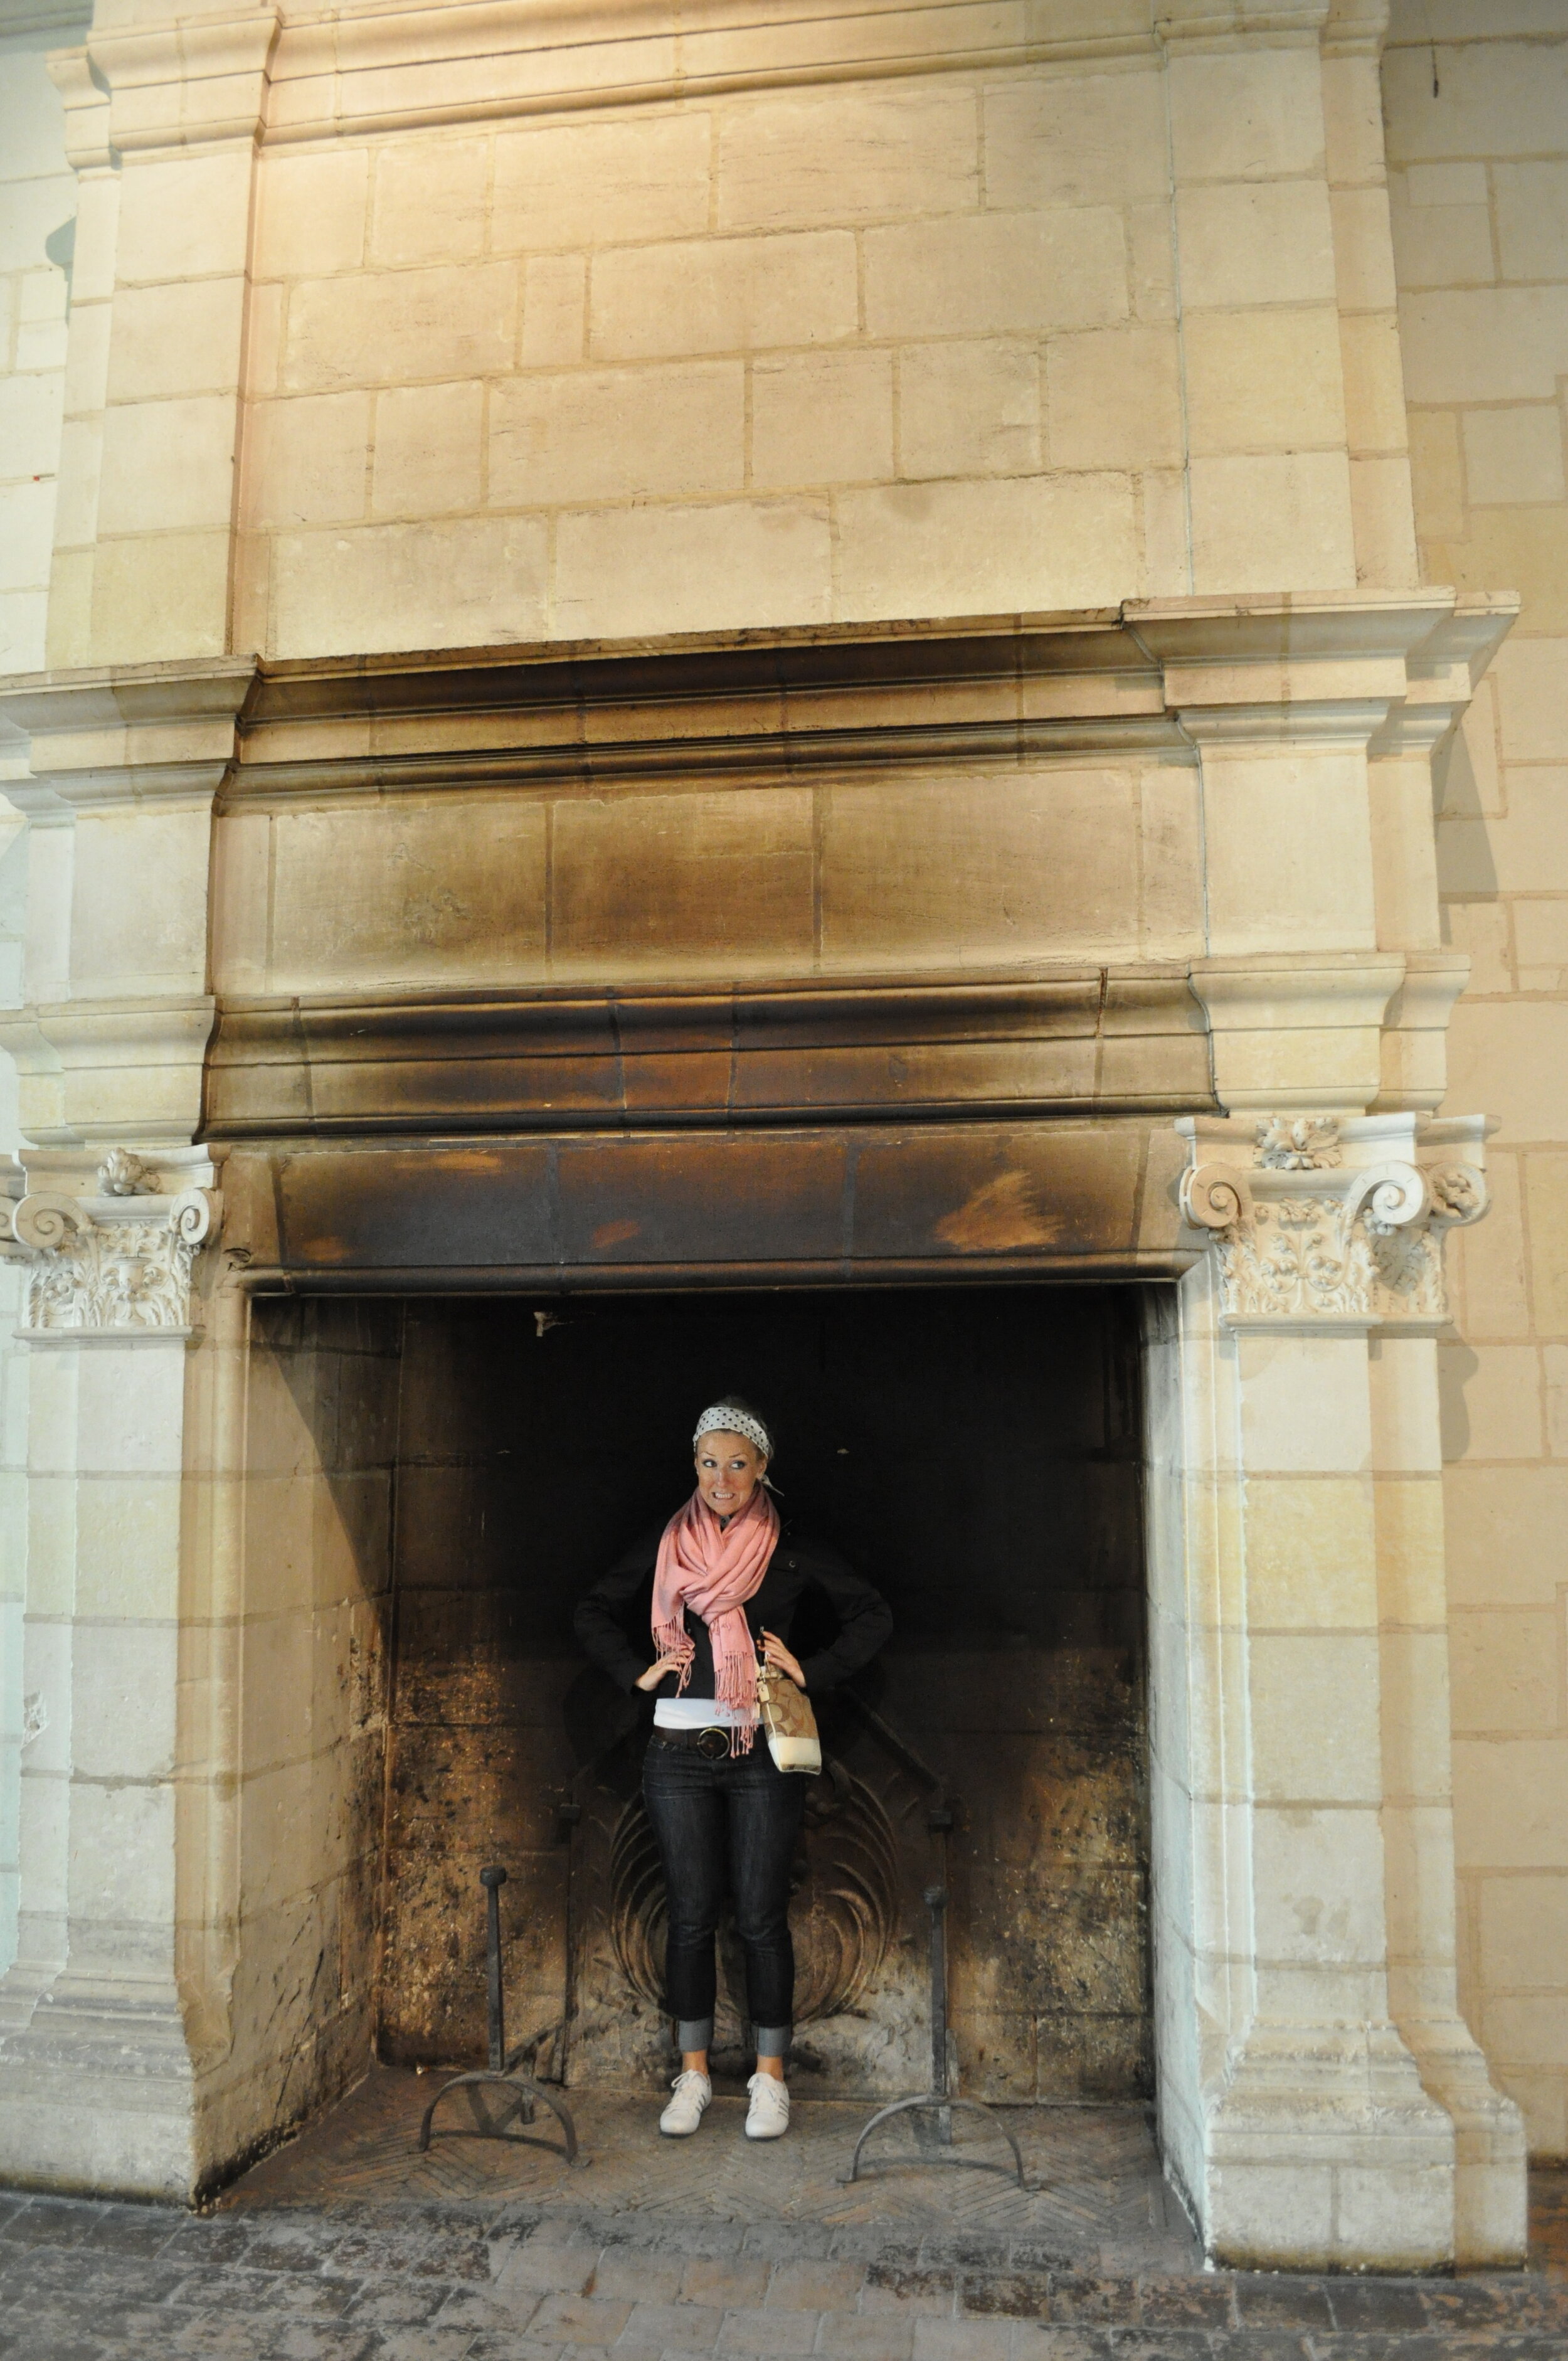 Enormous fireplaces